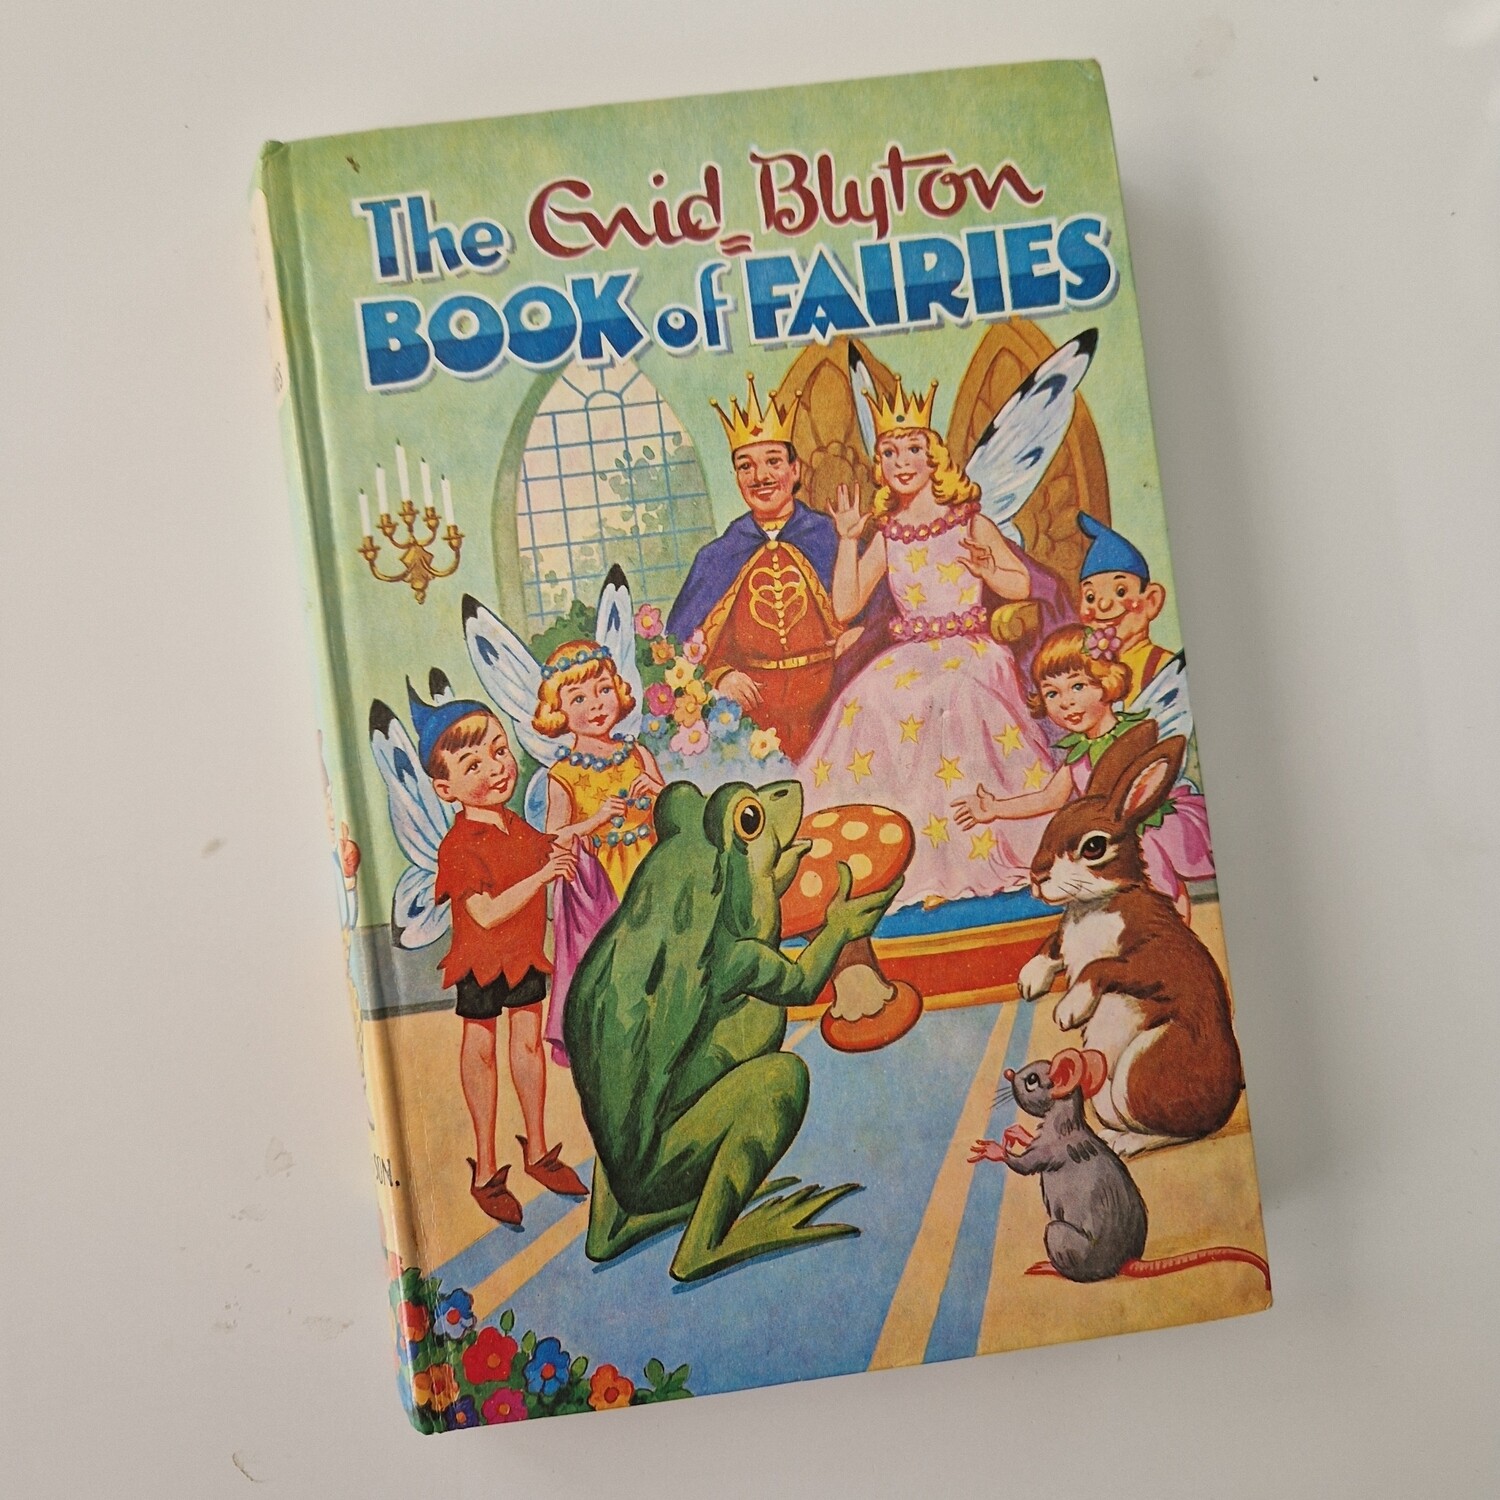 The Book of Fairies, Enid Blyton Notebook